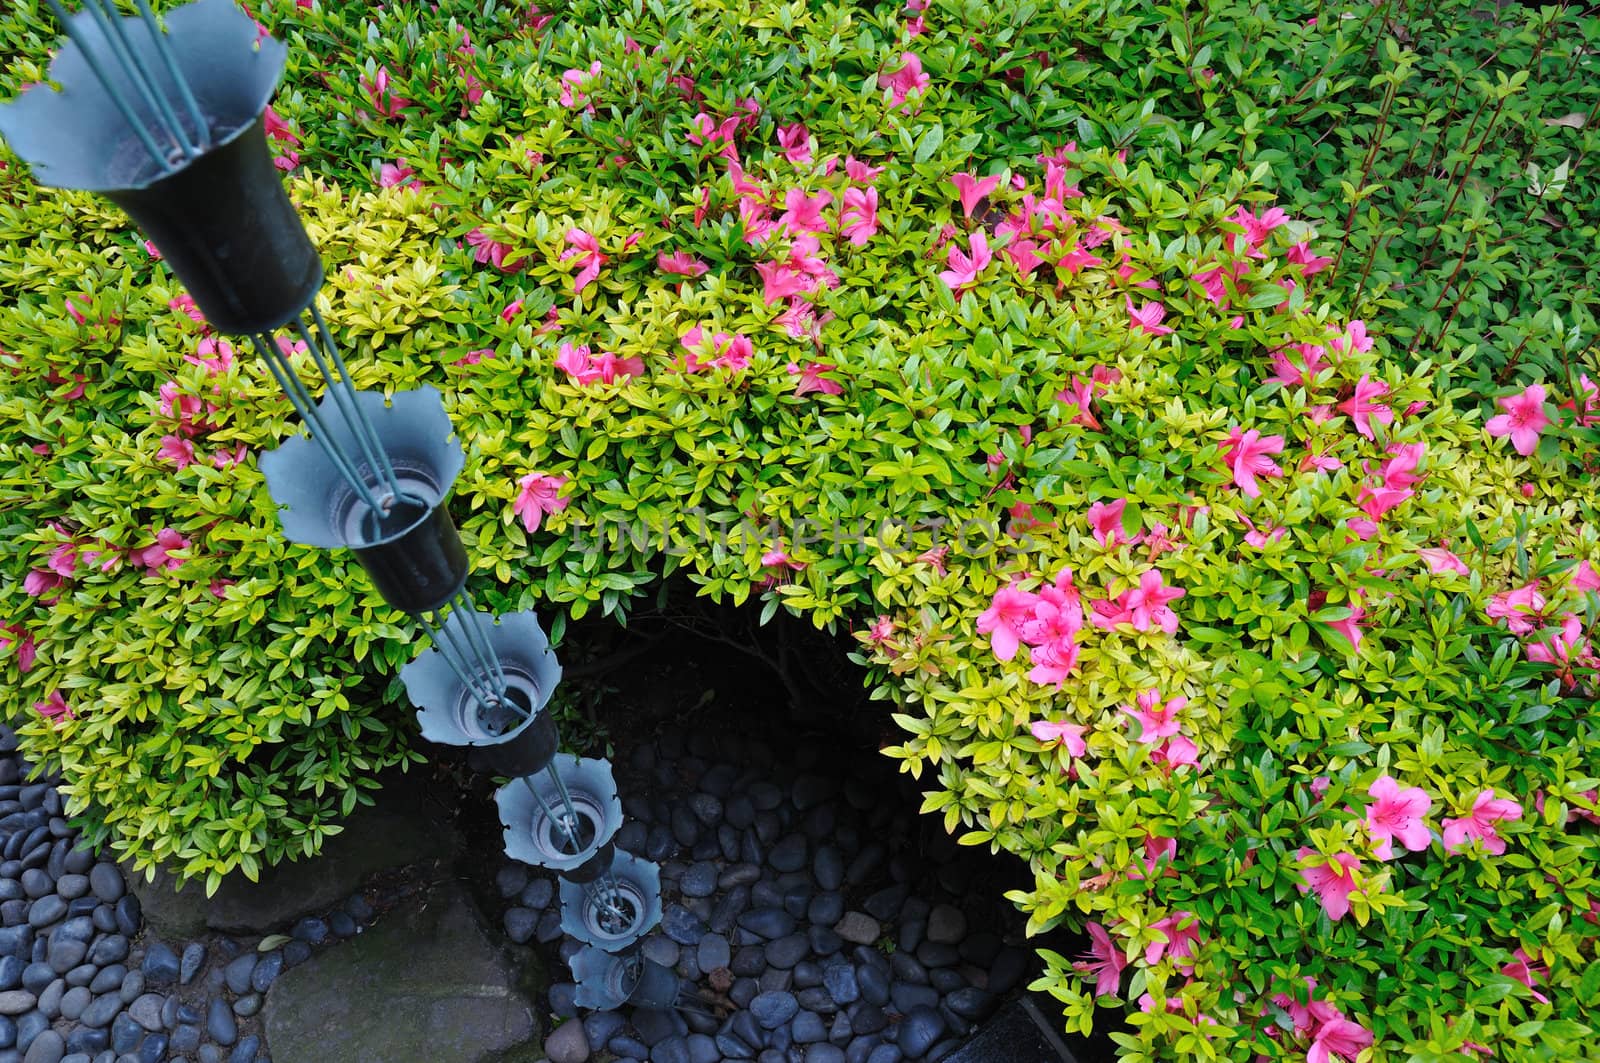 blossom azalea flowers around hanged up traditional metallic bells used for rain waters way-out in japanese zen garden